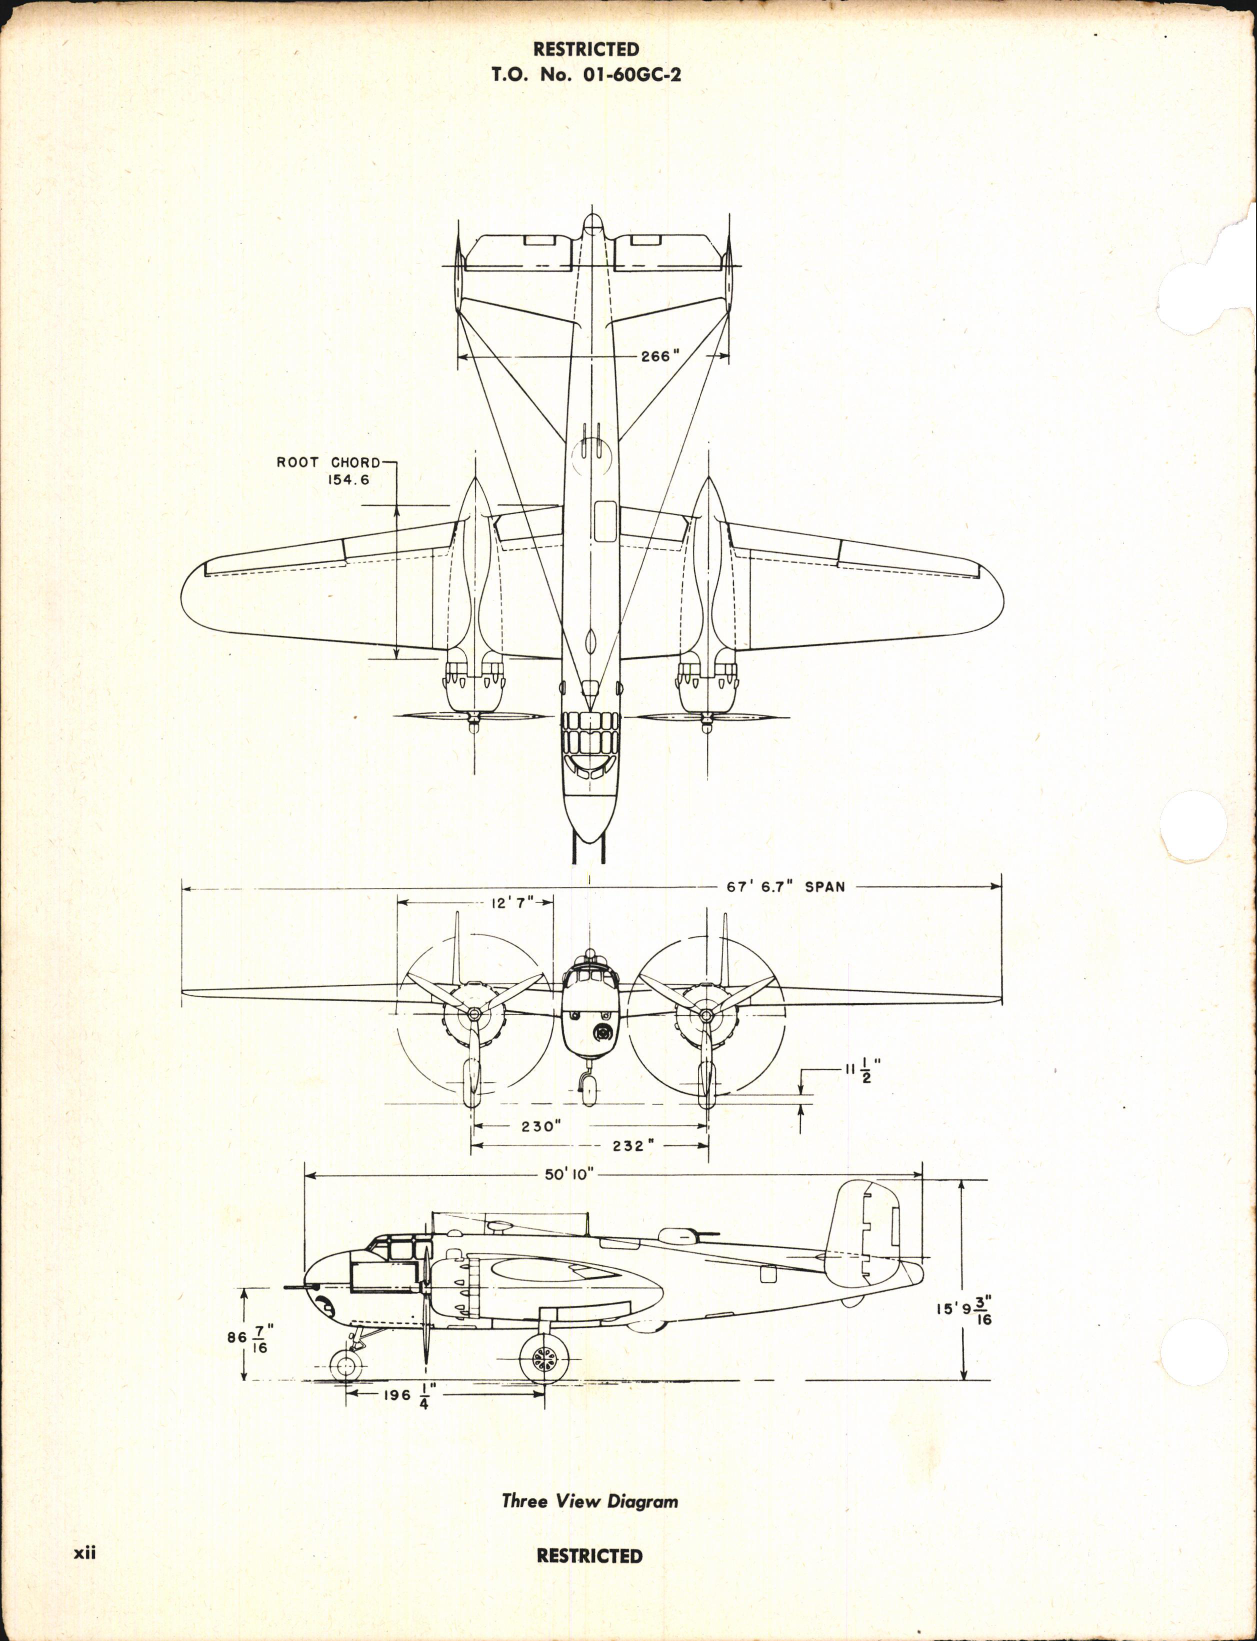 Sample page 16 from AirCorps Library document: Erection and Maintenance Instructions for B-25G and PBJ-1G Airplanes